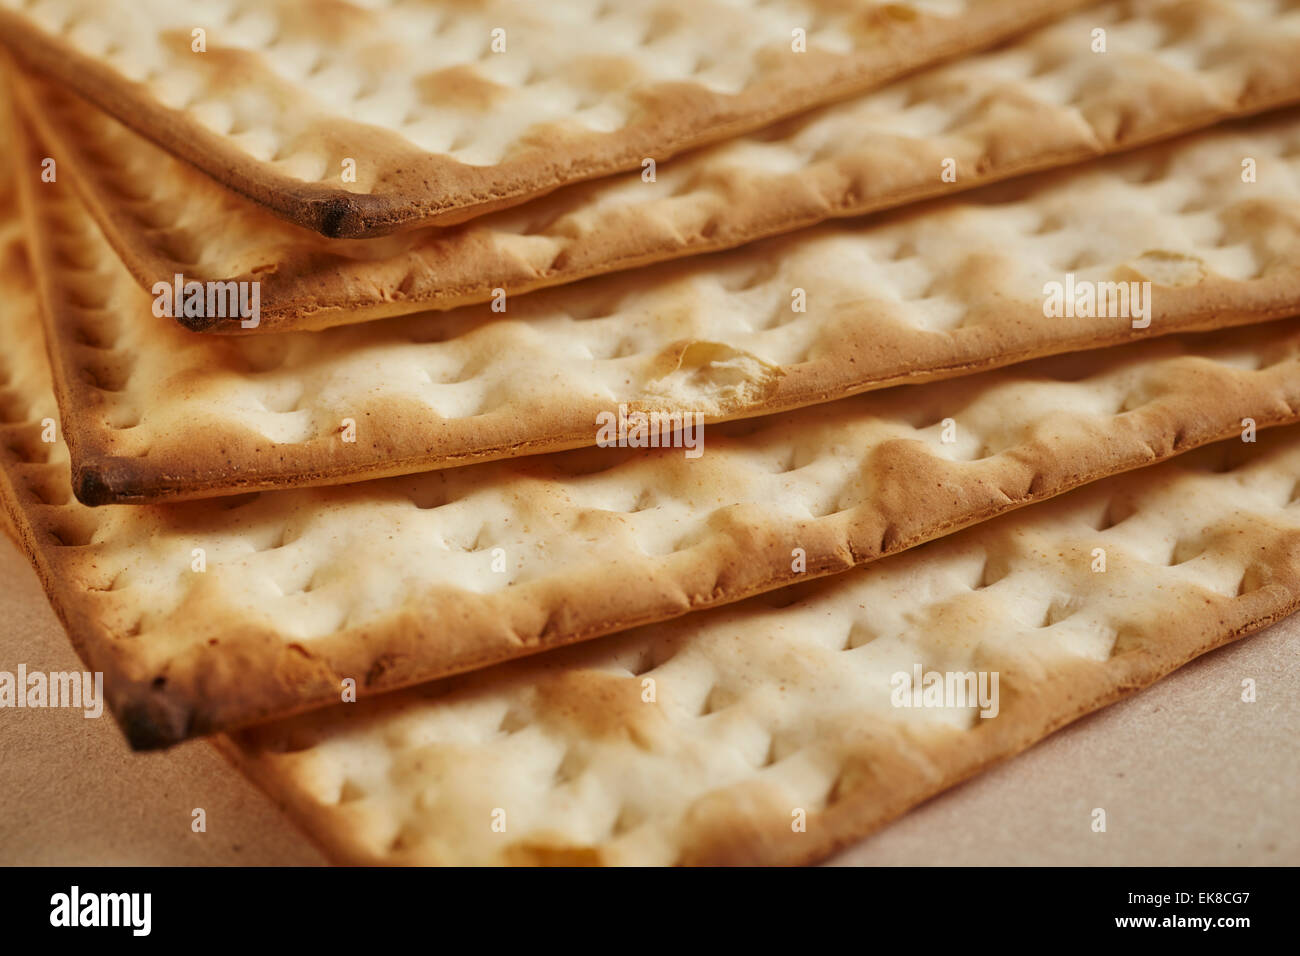 Matzo, the traditional cracker bread for the passover holidays Stock Photo